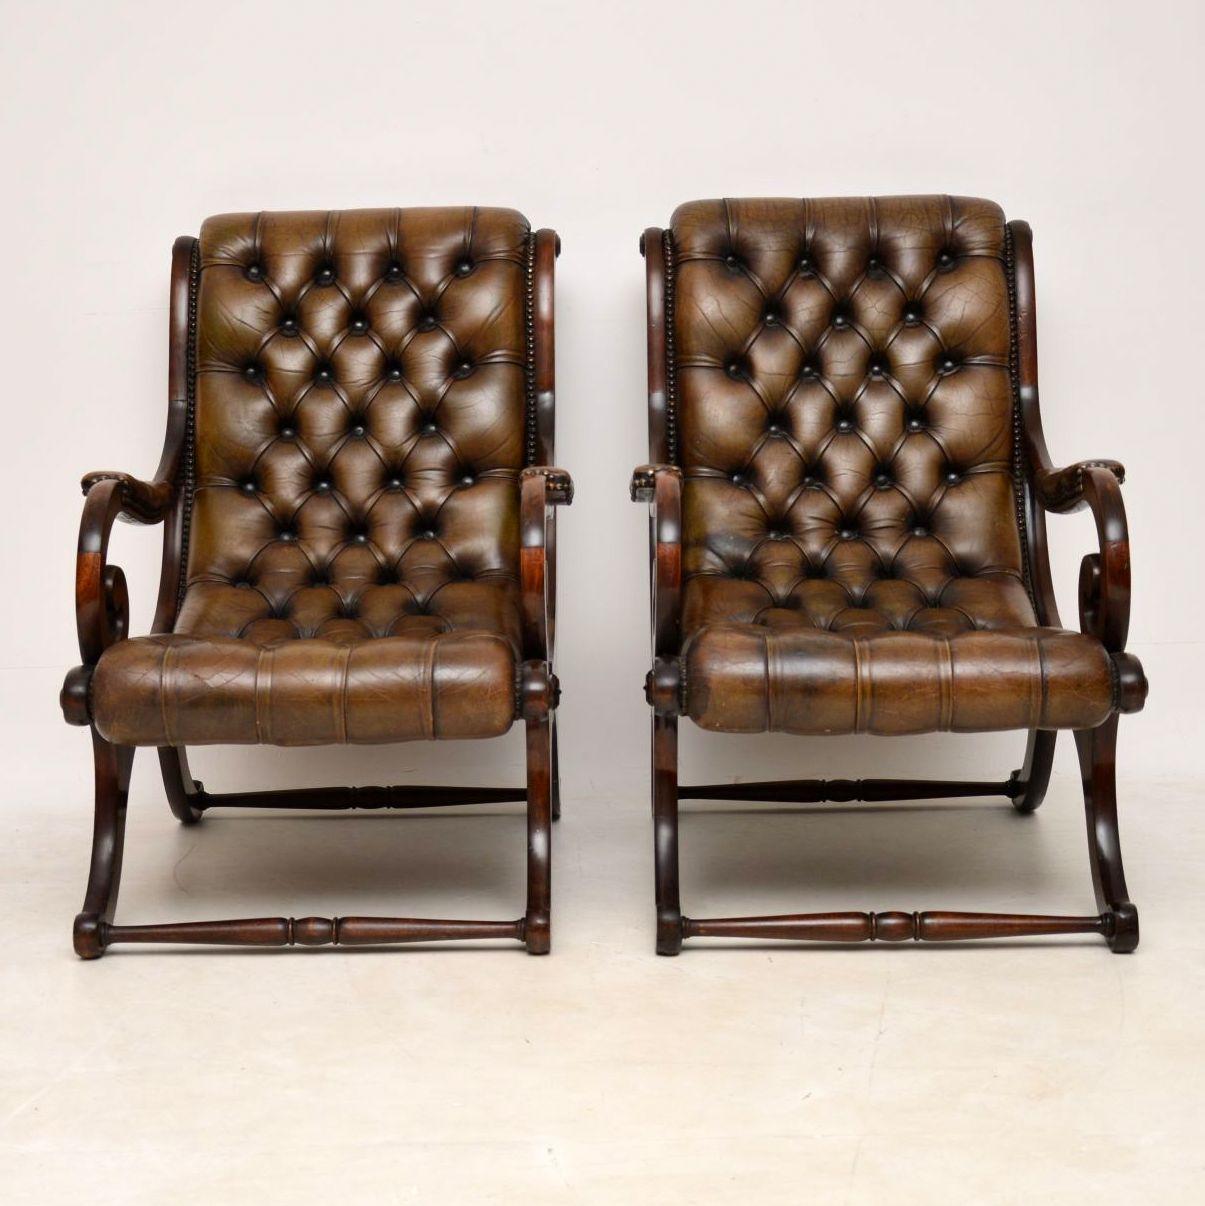 Edwardian Pair of Antique Mahogany and Leather Armchairs